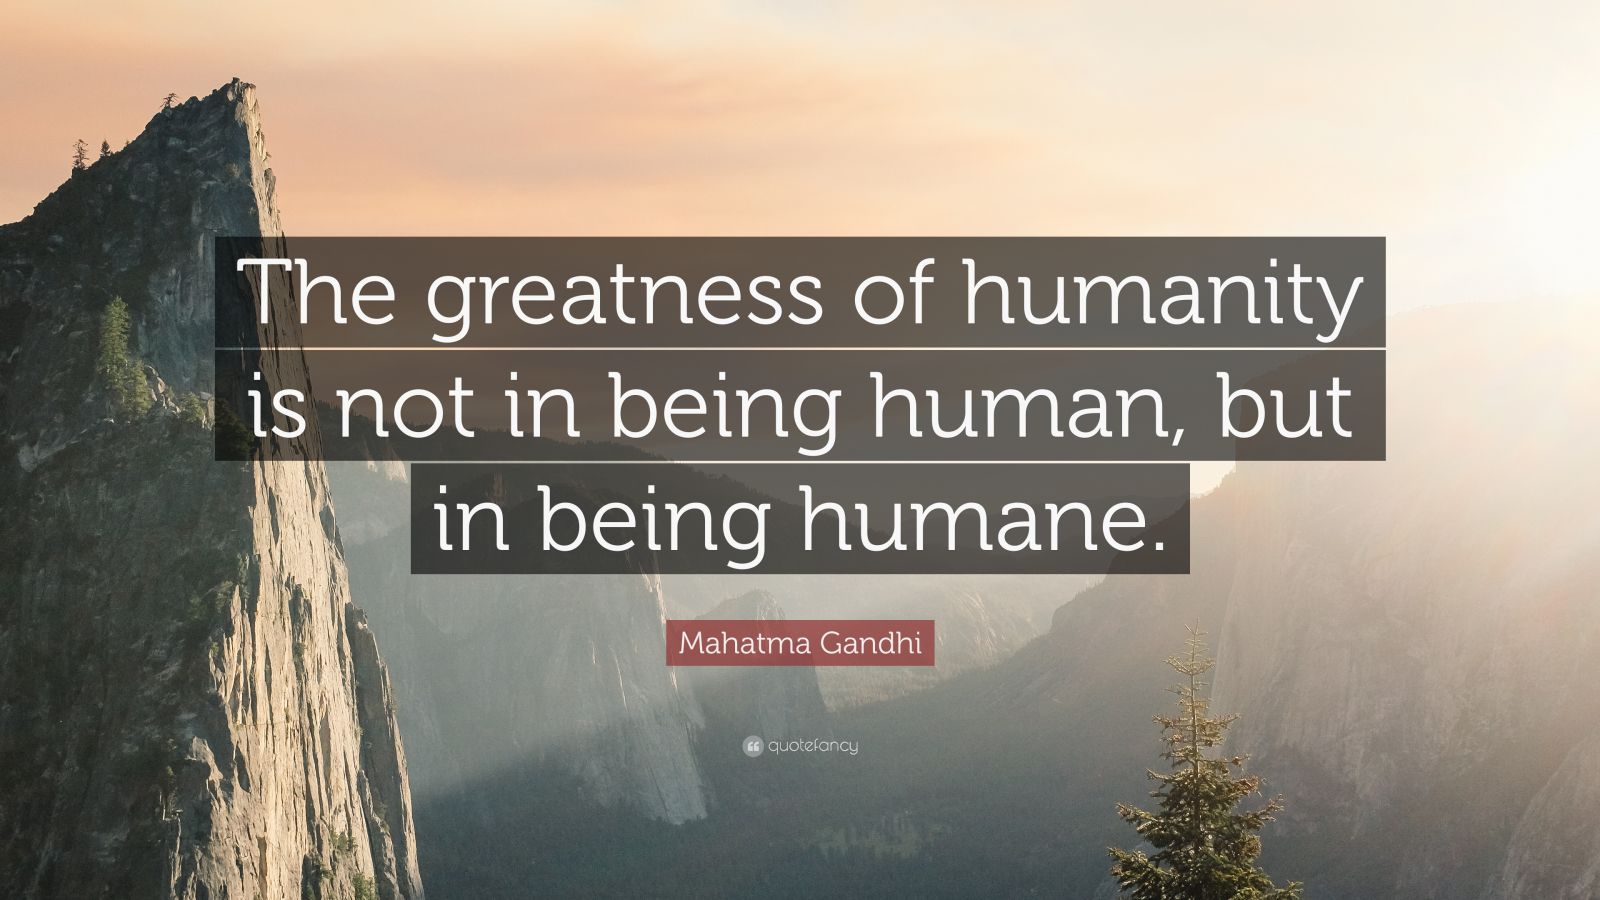 Mahatma Gandhi Quote: “The greatness of humanity is not in being human